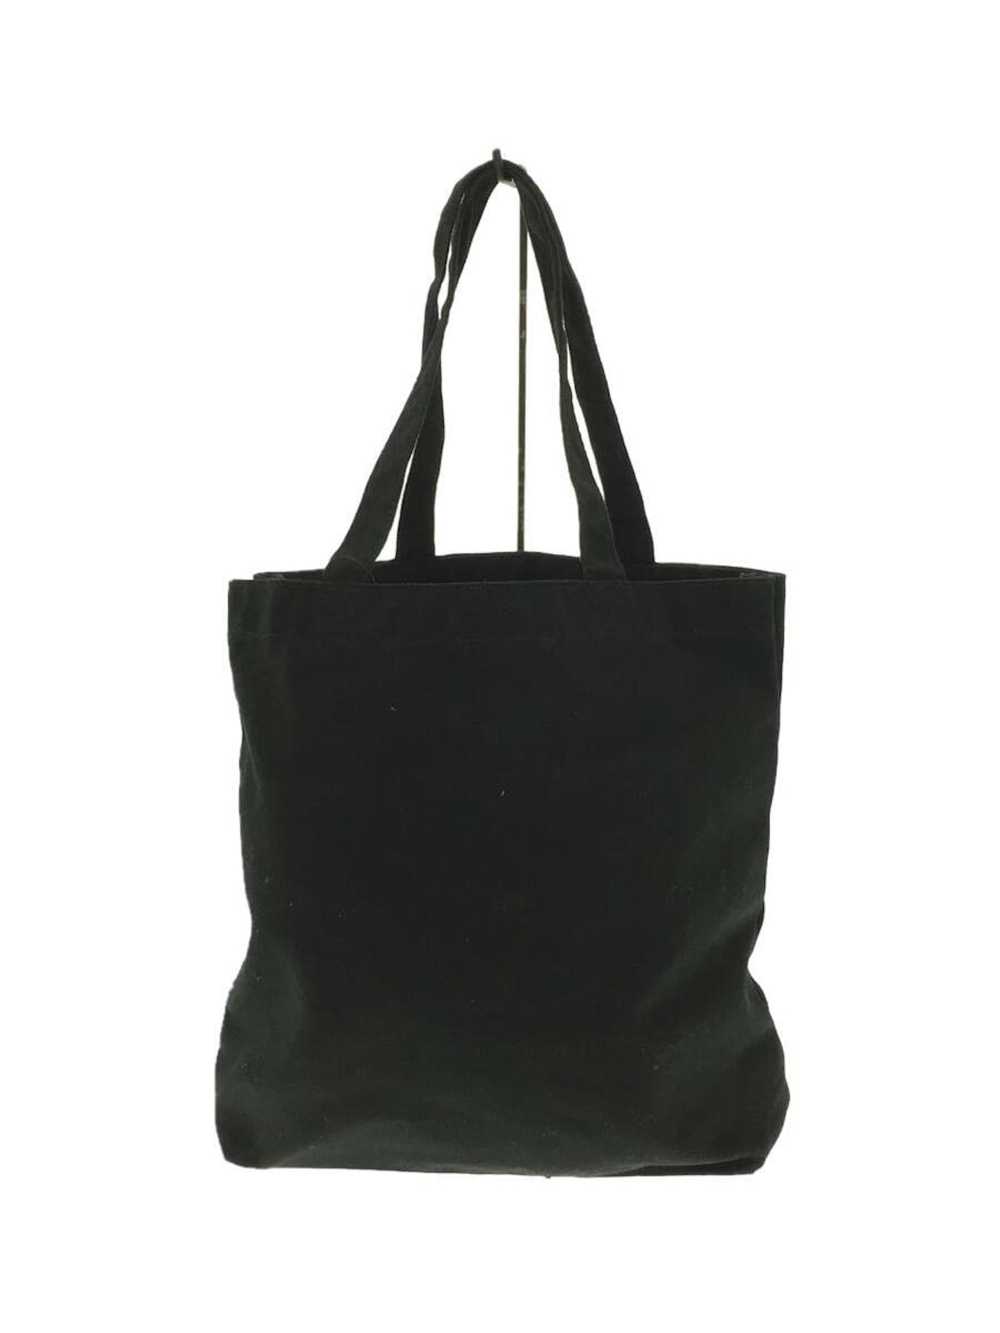 Undercover Blindfold Bear Tote Bag - image 3